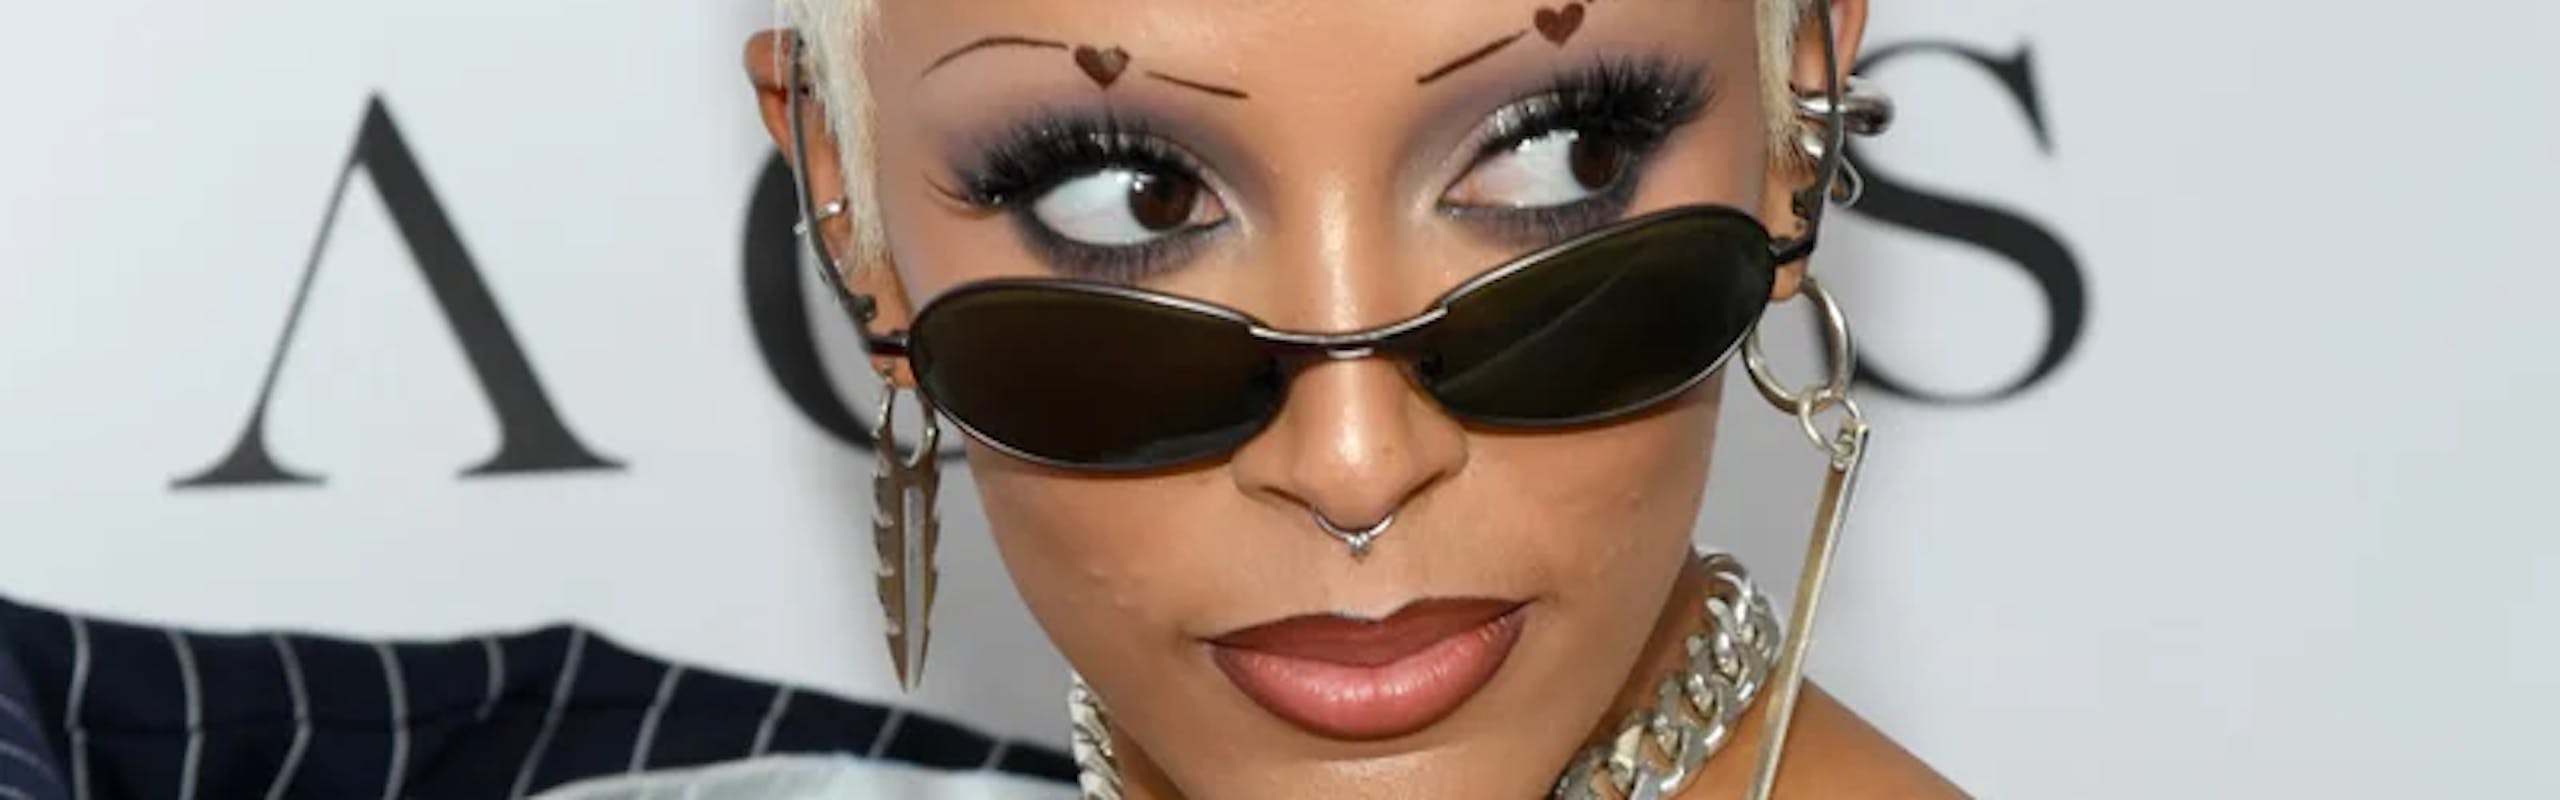 doja cat with pinstripe top, black sunglasses, and heart eyebrows